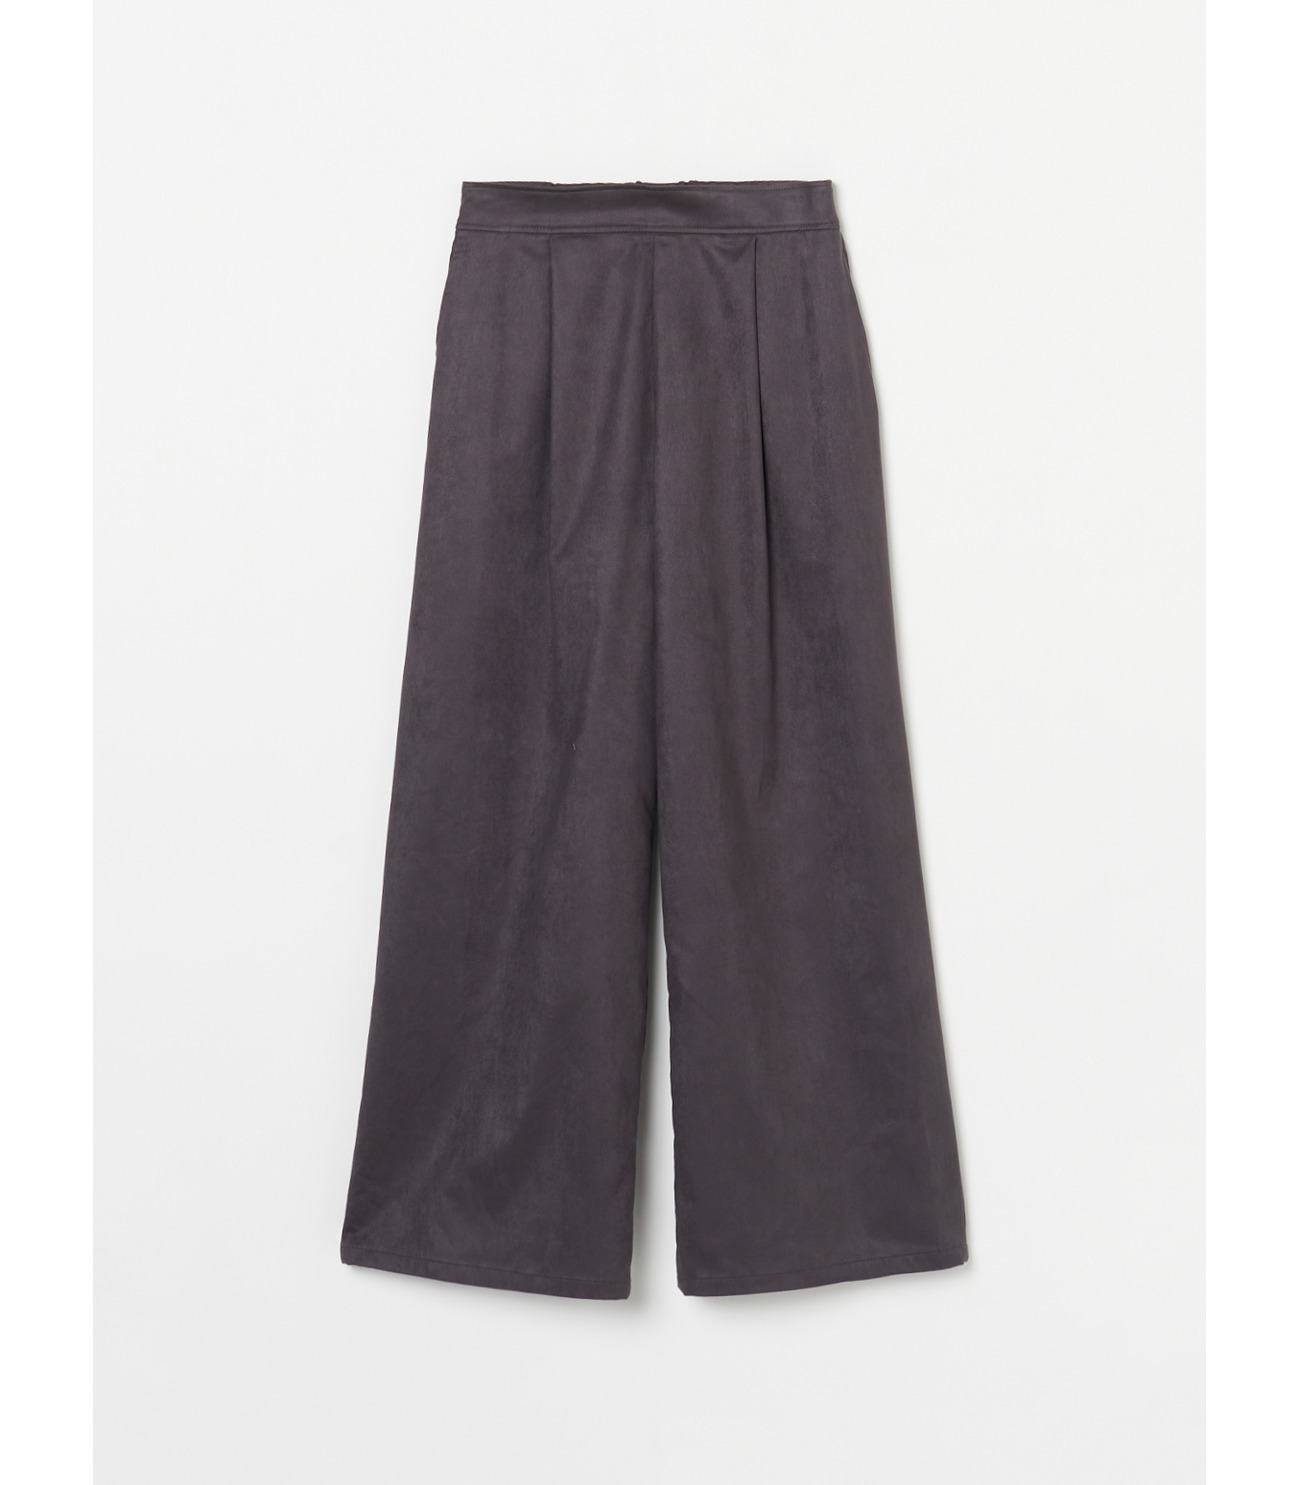 Fake suede wide pant 詳細画像 charcoal black 1